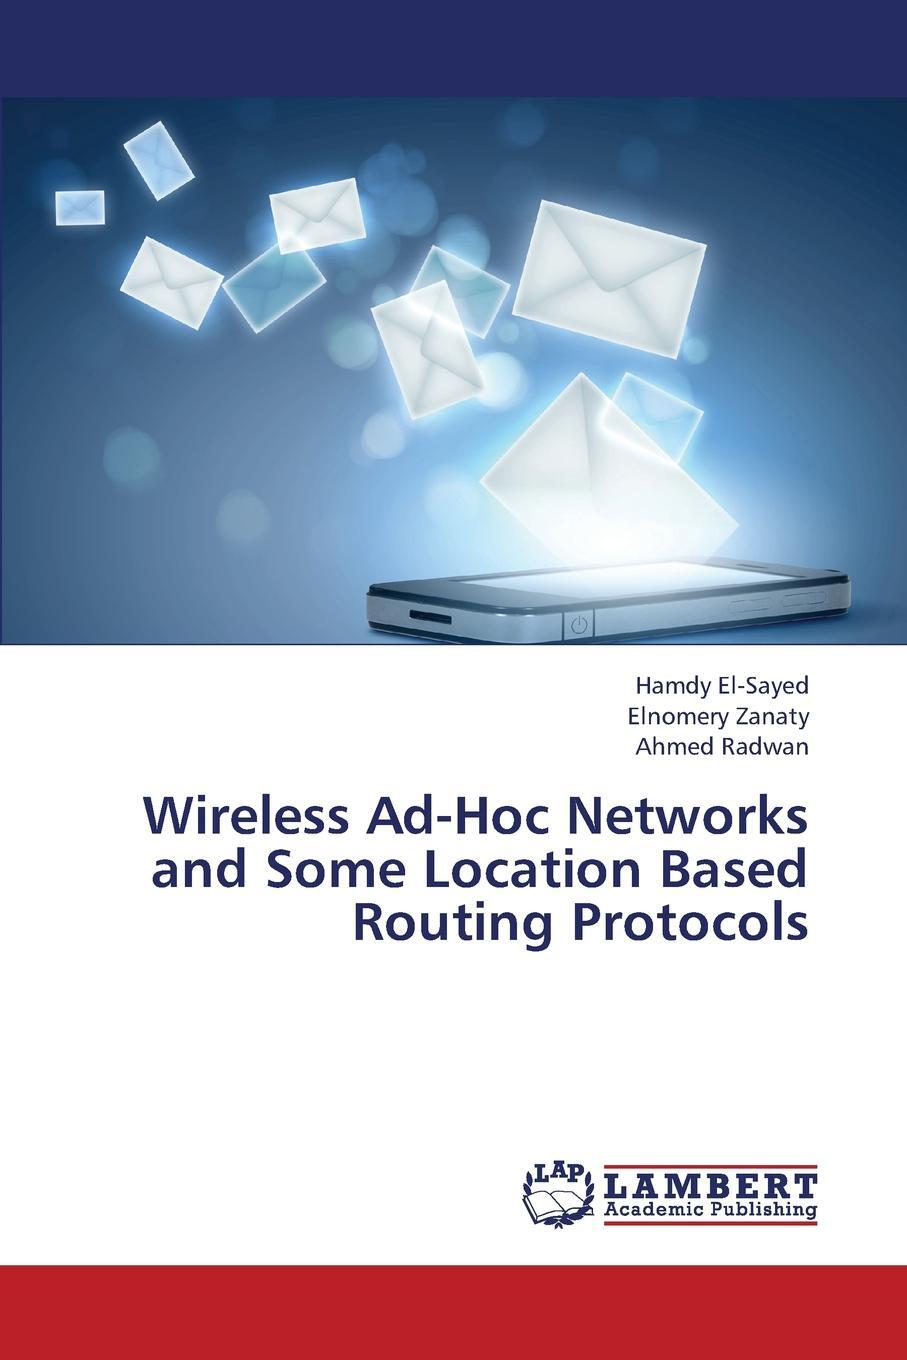 фото Wireless Ad-Hoc Networks and Some Location Based Routing Protocols